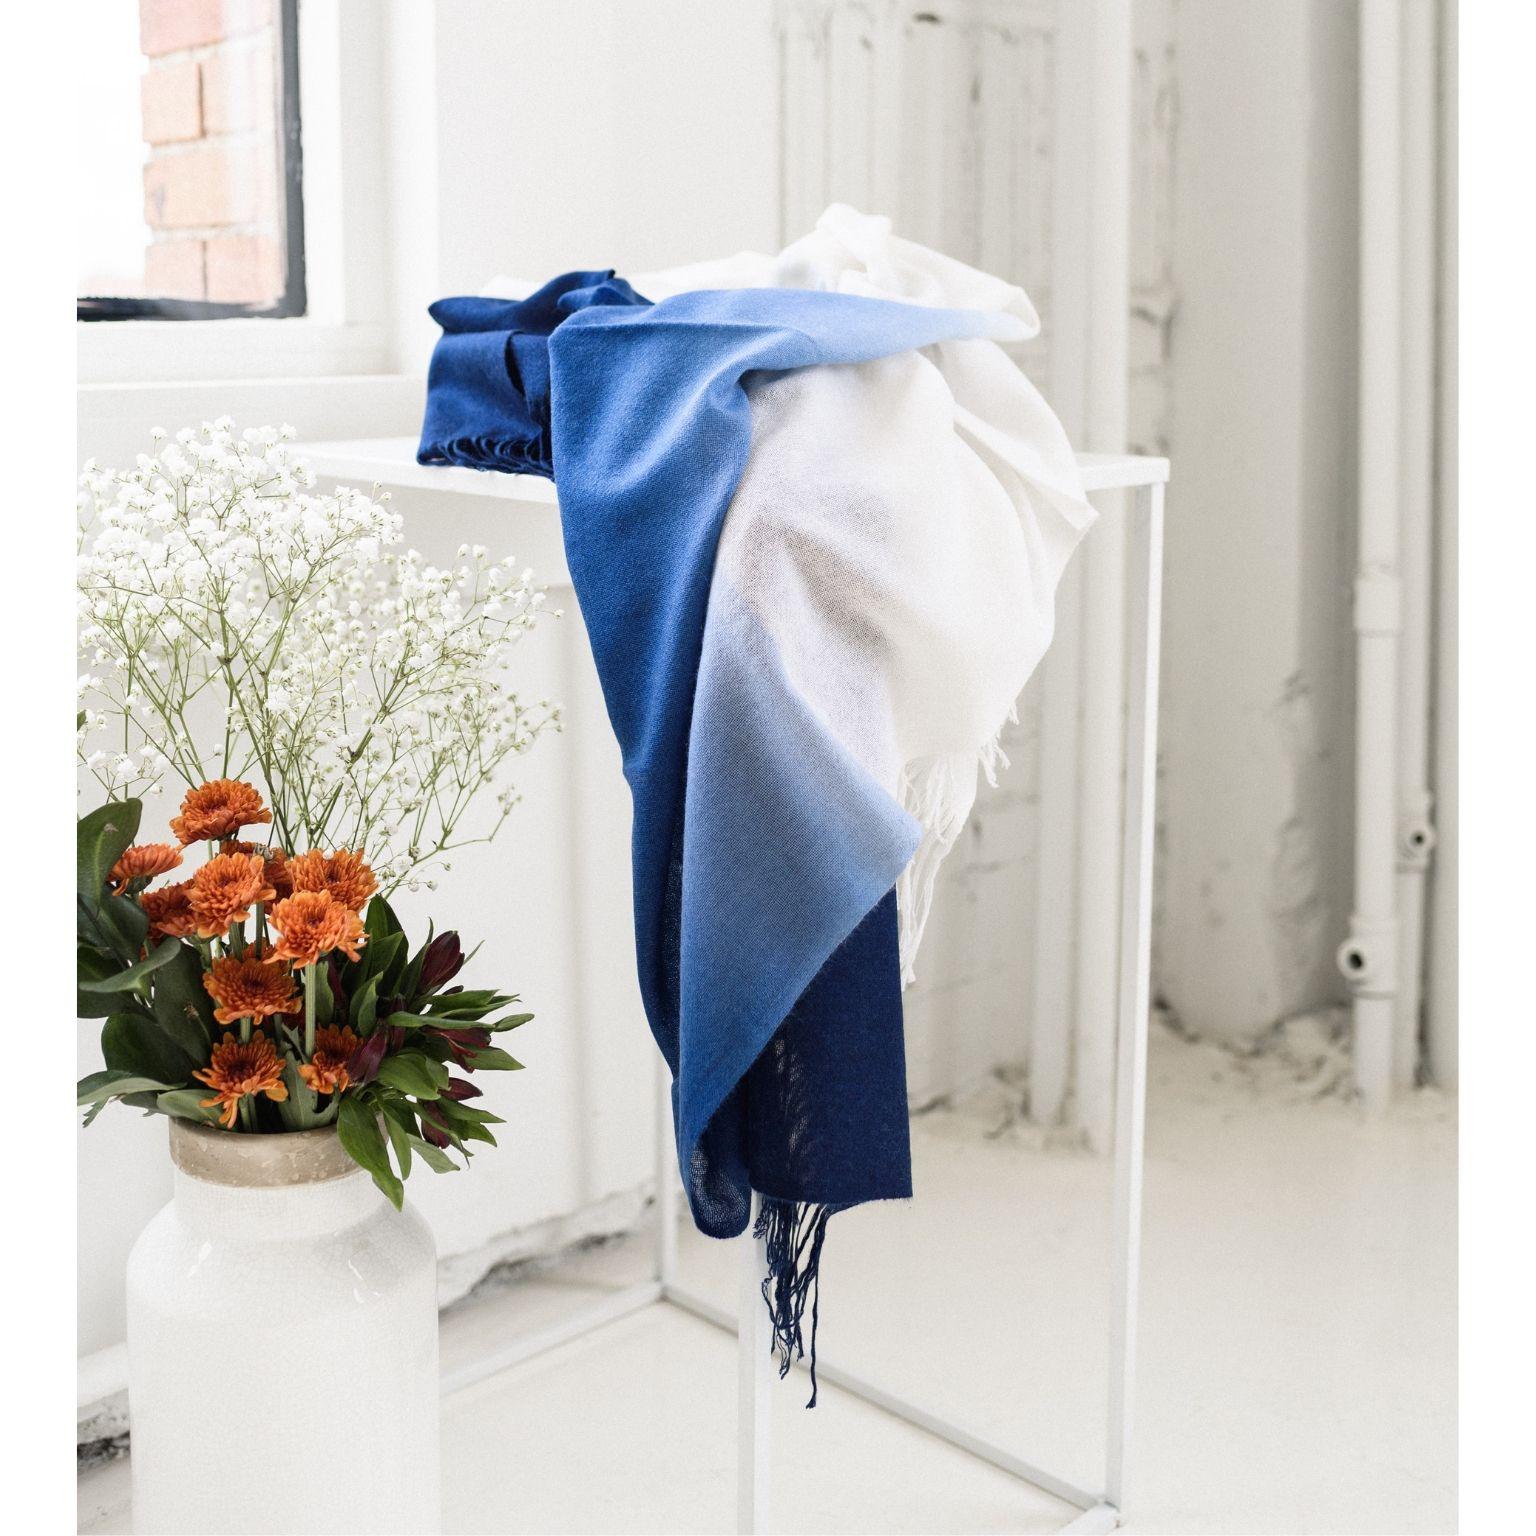 Yarn AZURE Handloom Cashmere Light Weight Ombre Dyed Throw / Blanket  For Sale